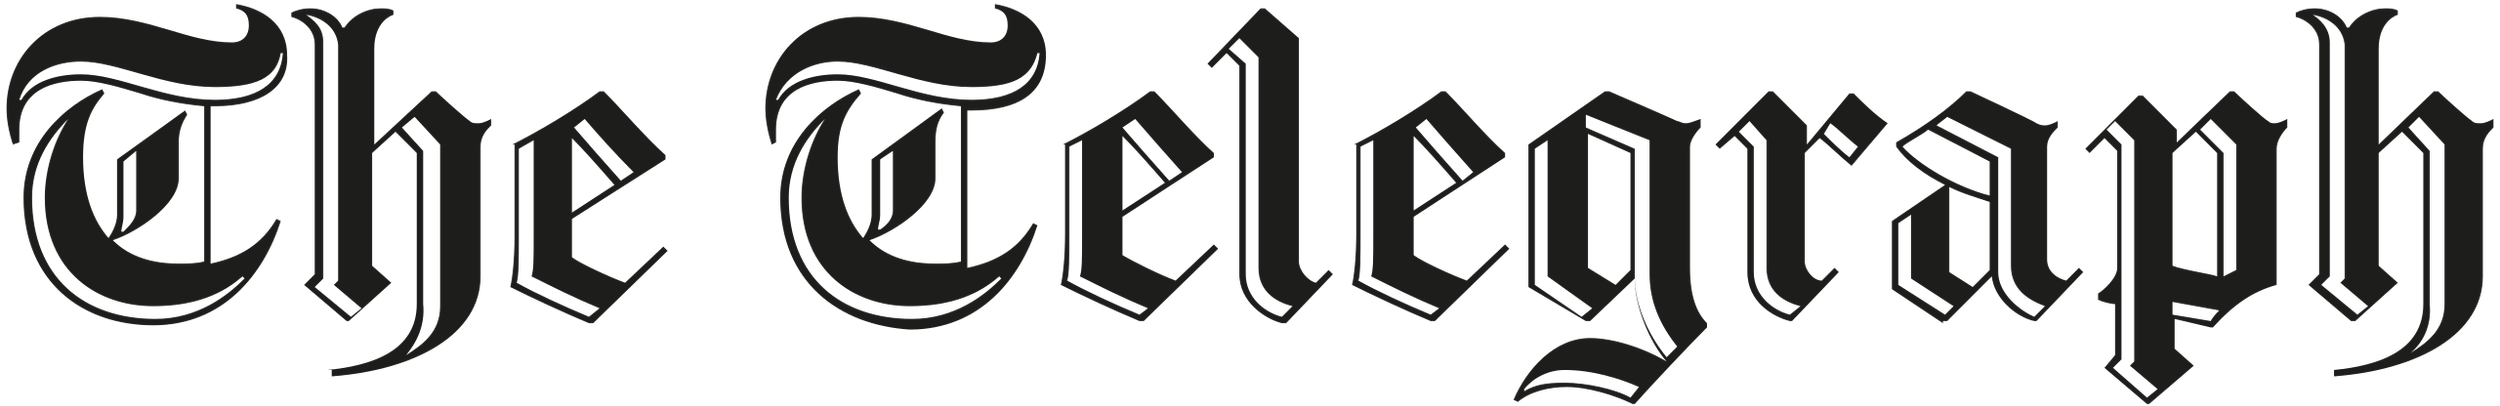 2560px-The_Telegraph_logo.svg.png